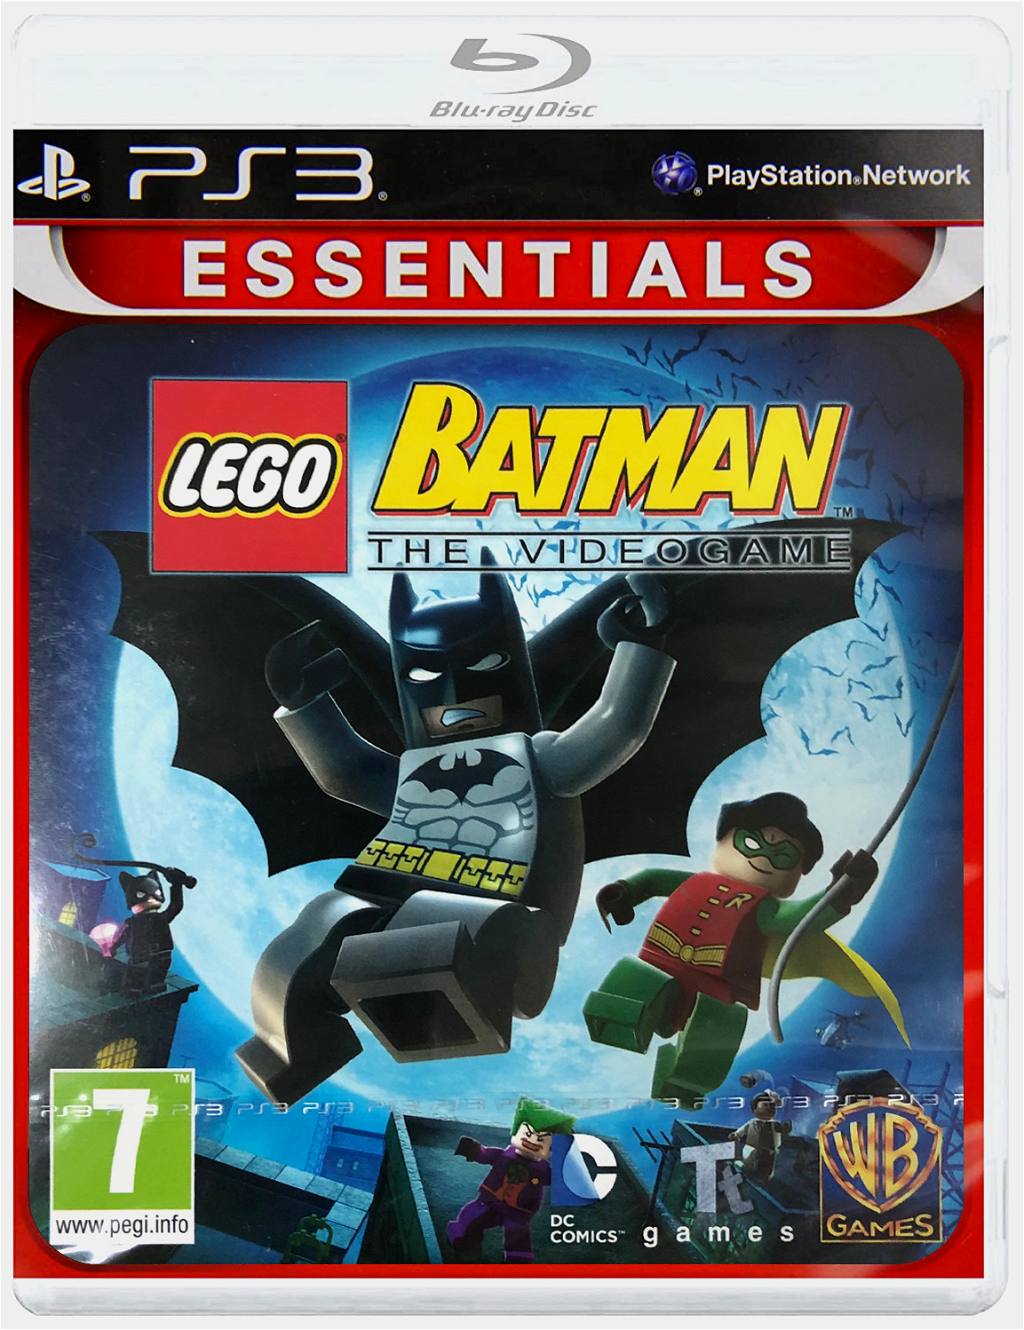 Batman: The Video Game (Essentials) for PlayStation 3